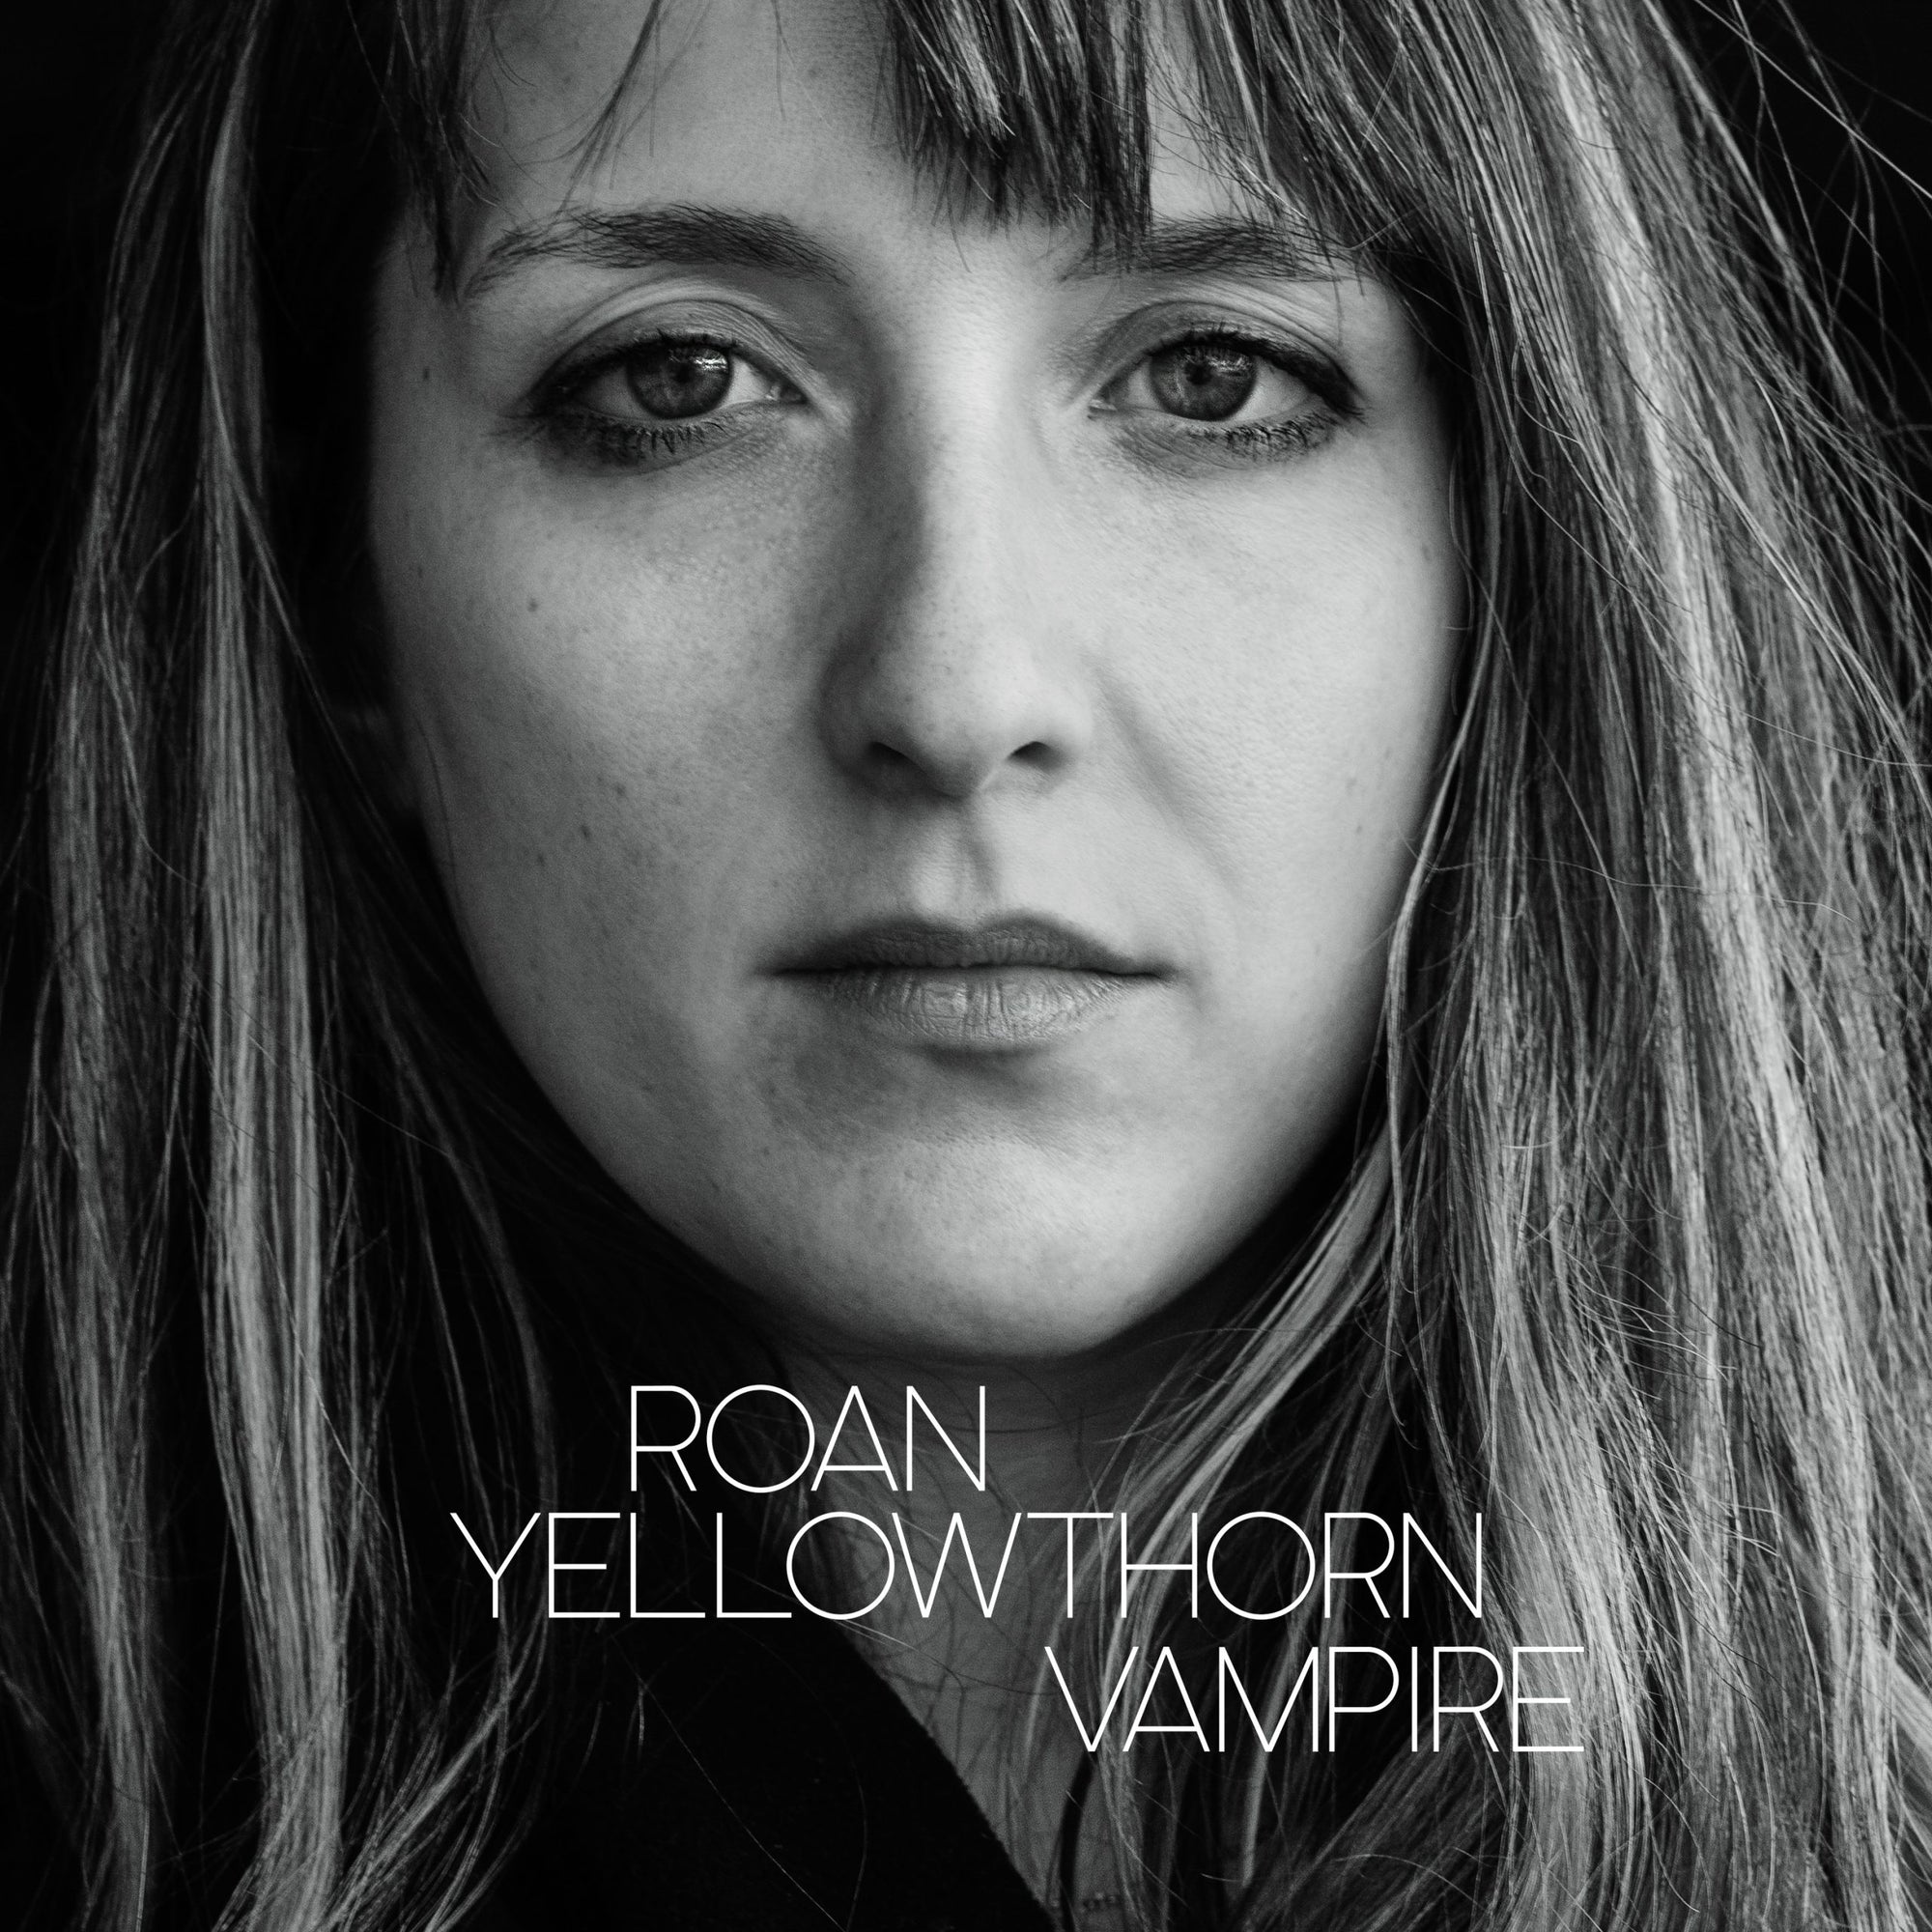 "Vampire," The Second Single From Roan Yellowthorn's Upcoming Album, Is Out Now